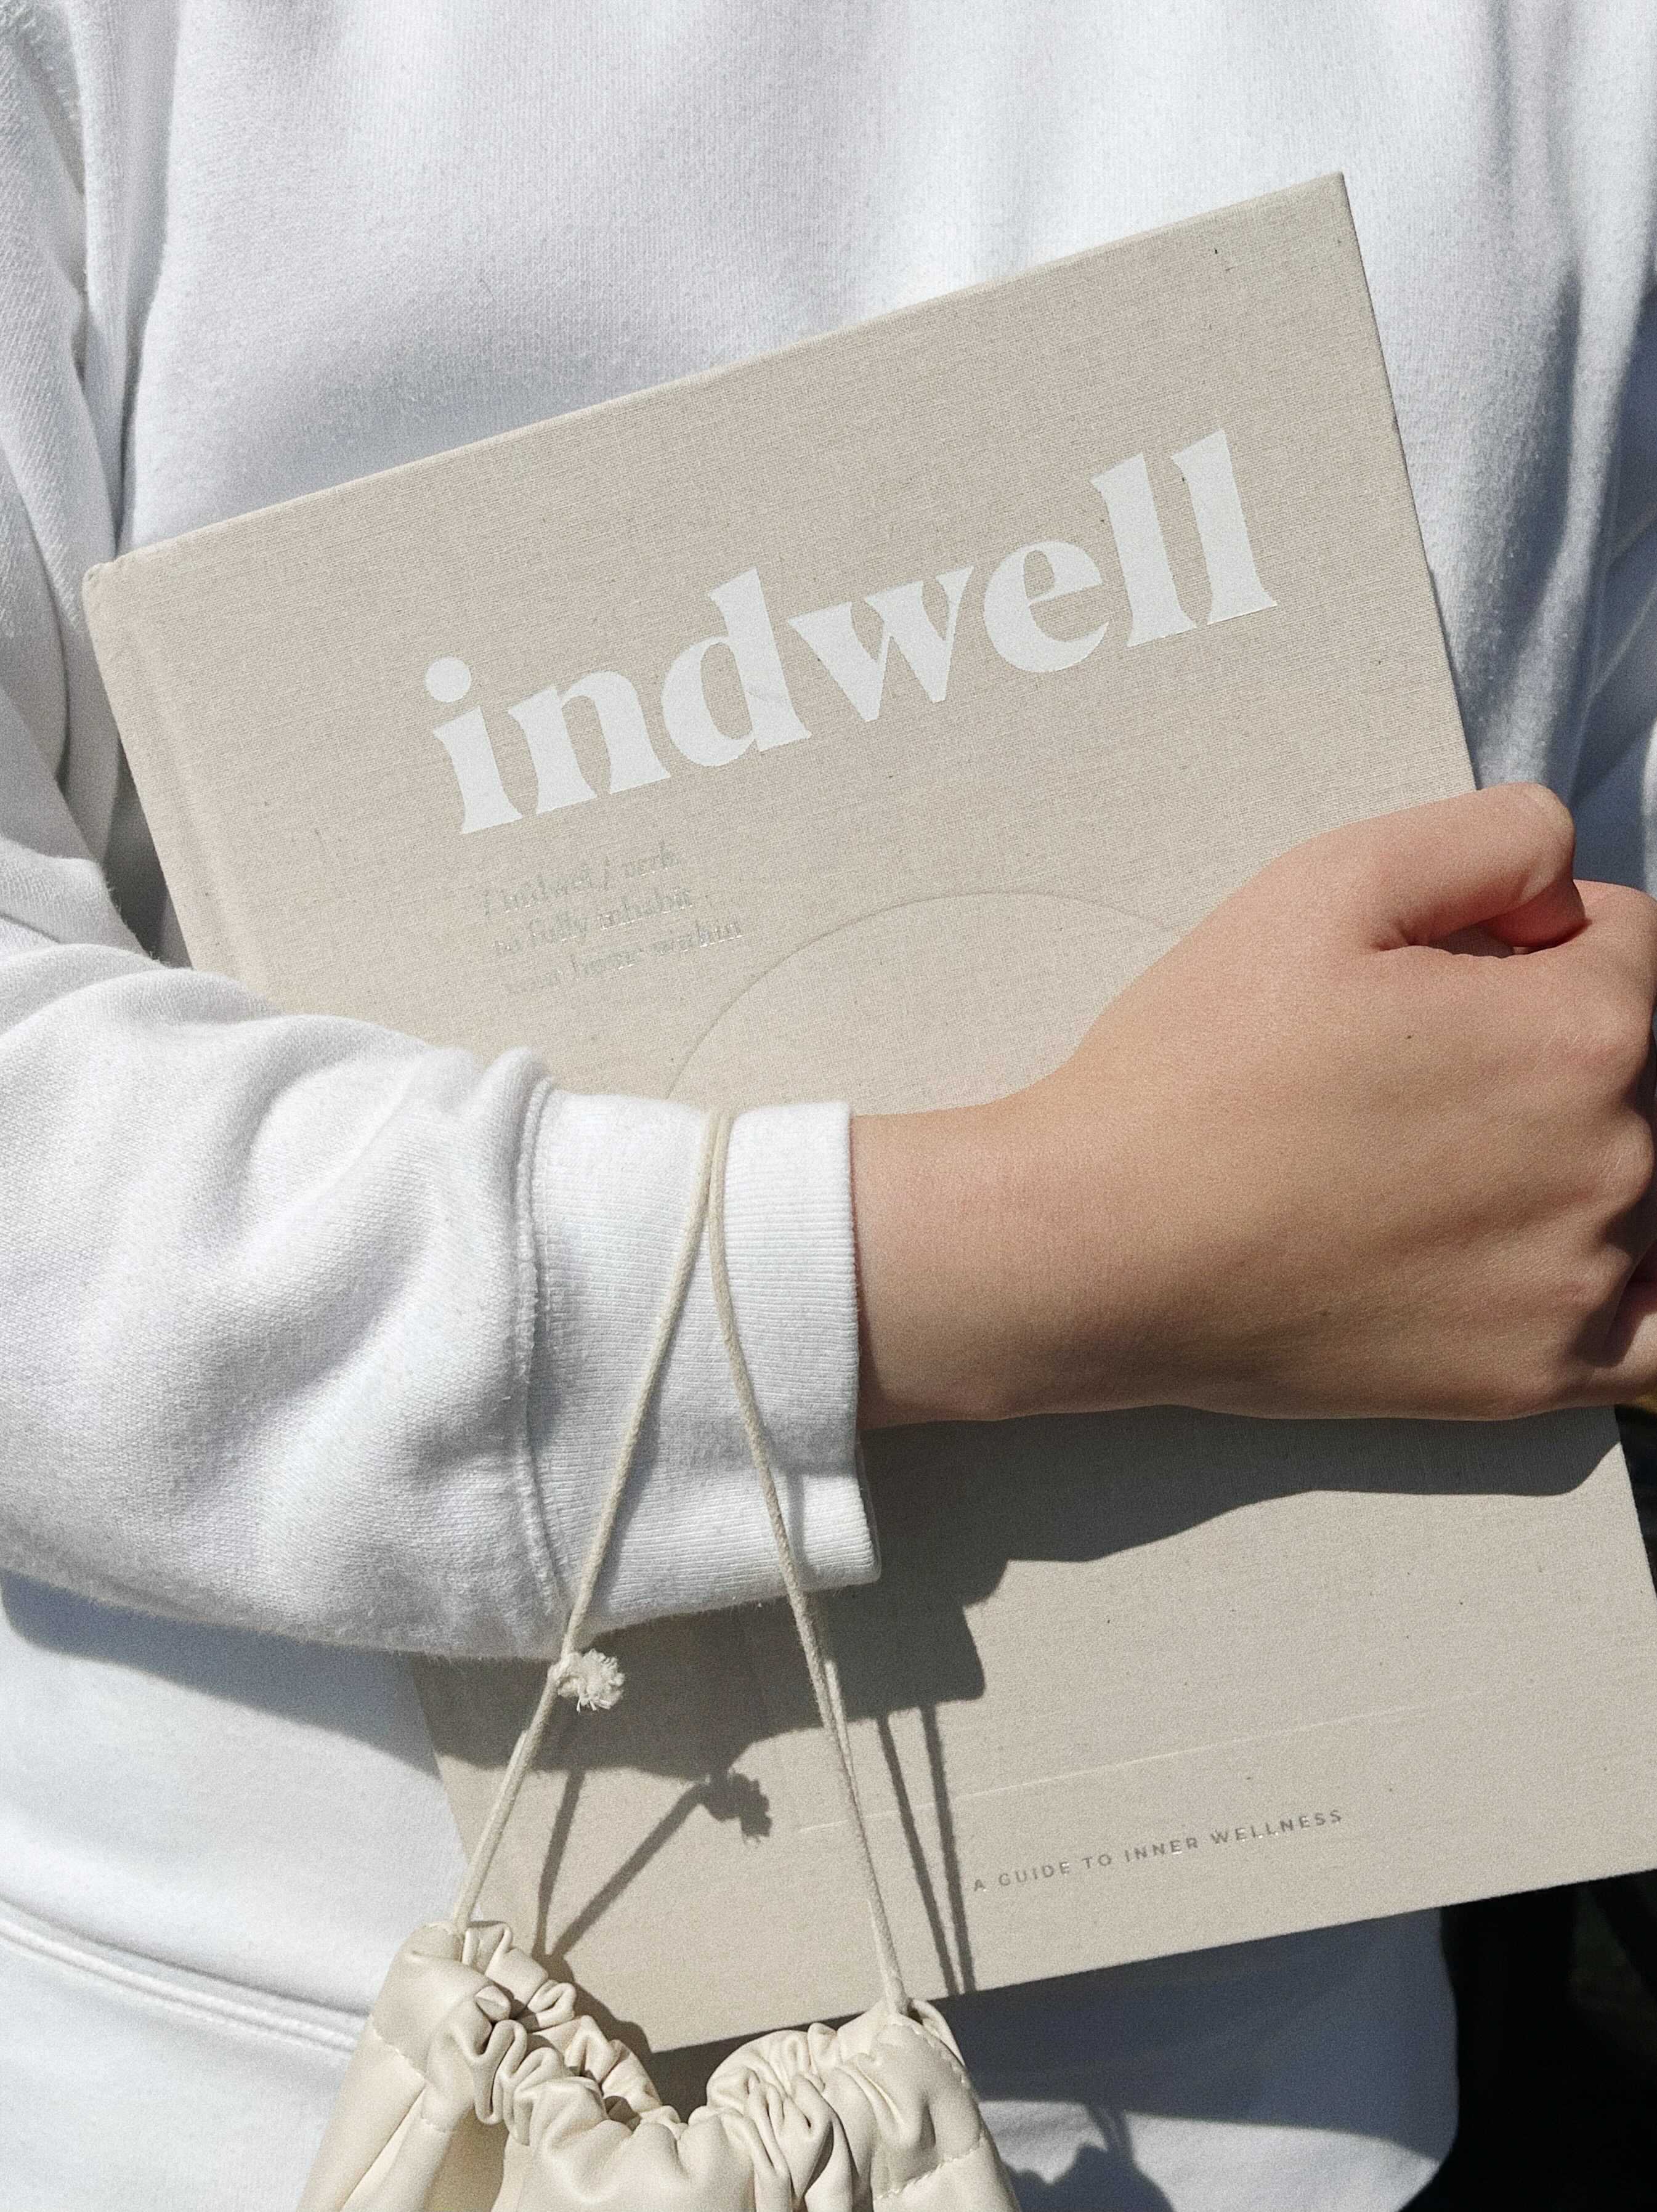 The Indwell Guide